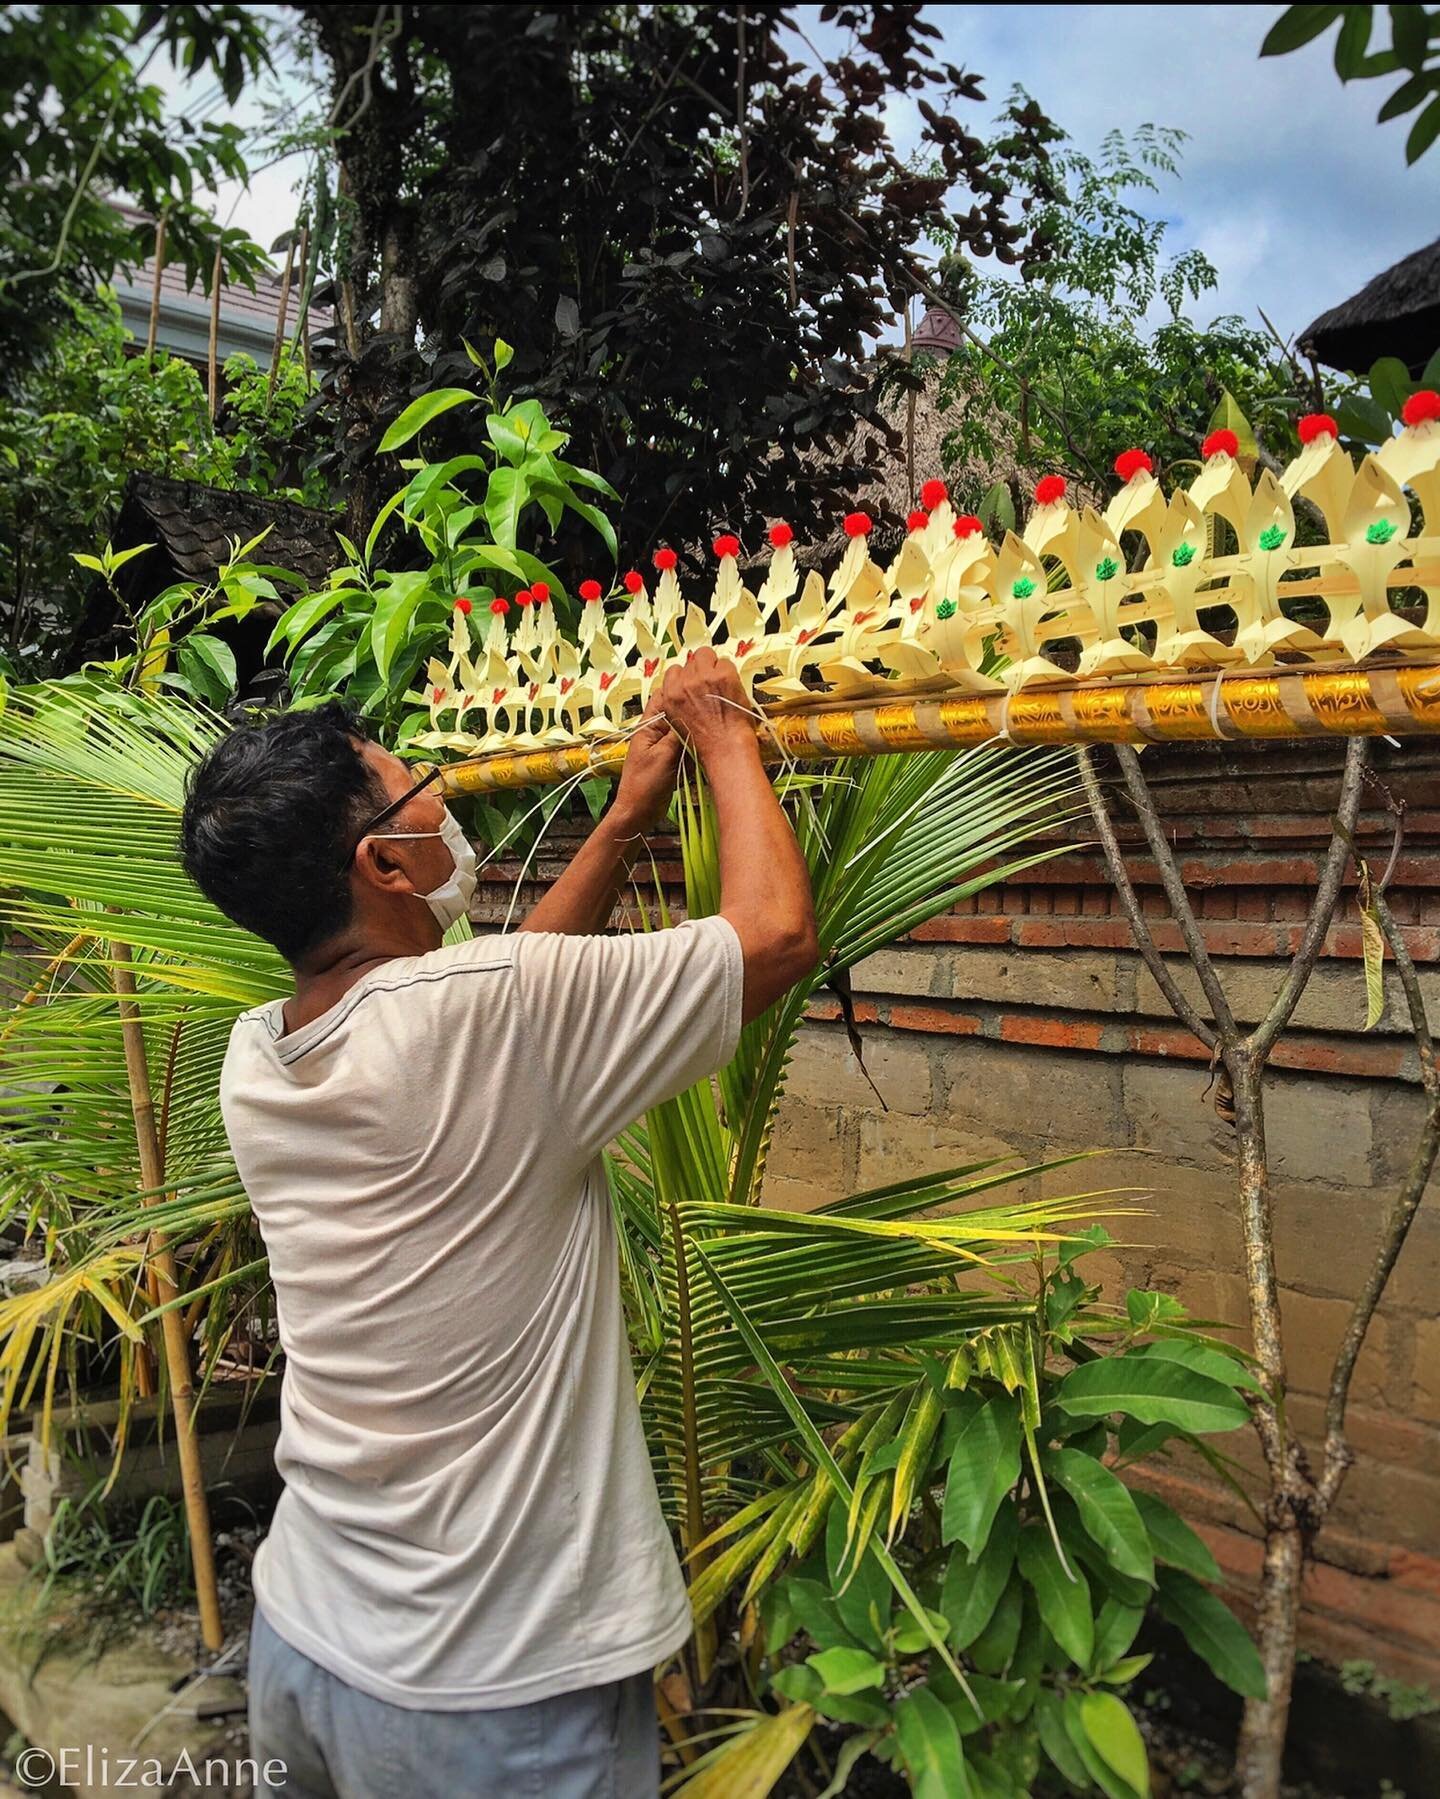 Happy Galungan. Biggest Holiday in Bali celebrated for 10 days. This local in Ubud is making his Penjor to put up on the street for the season. Nearly every household has one. They symbolize thinks to the Gods for everything they have been provided. 